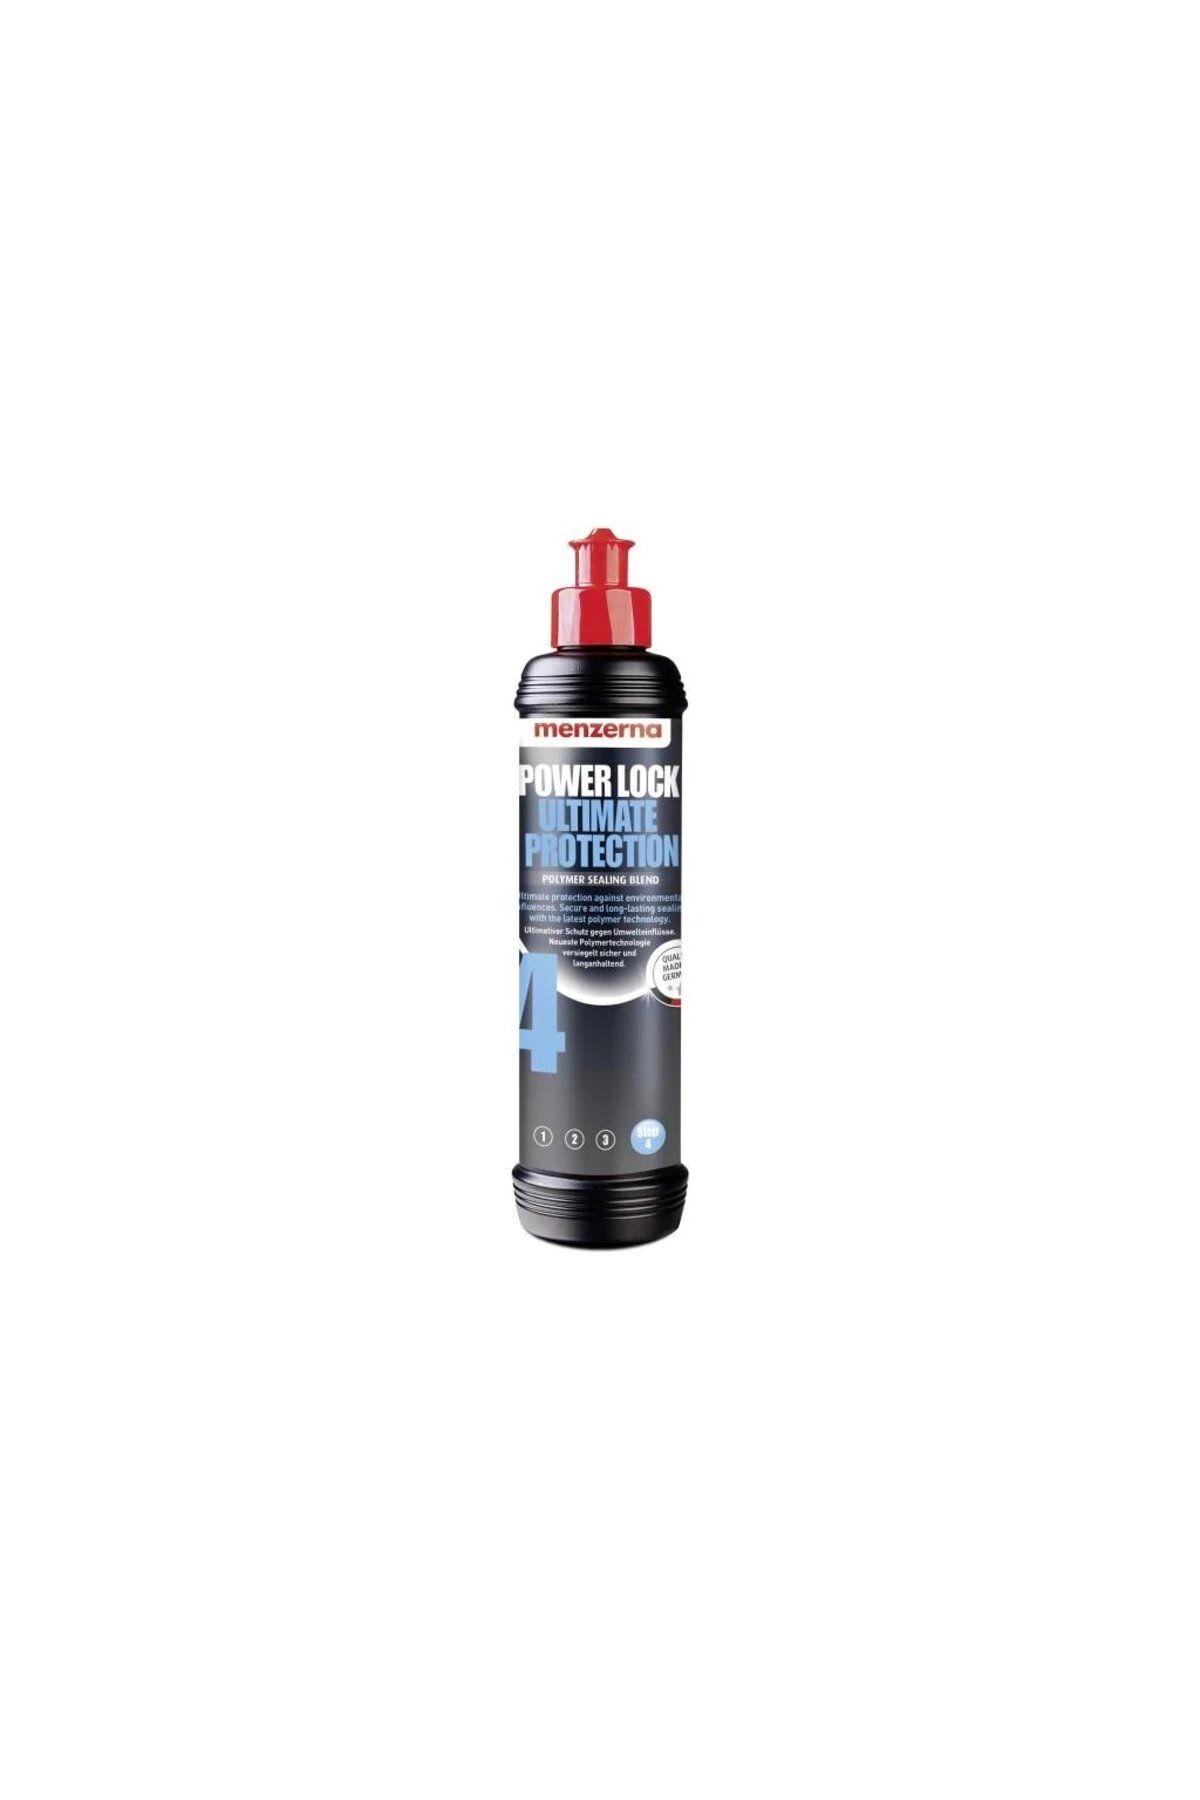 Menzerna Power Lock Ultimate Protection 250 Ml.